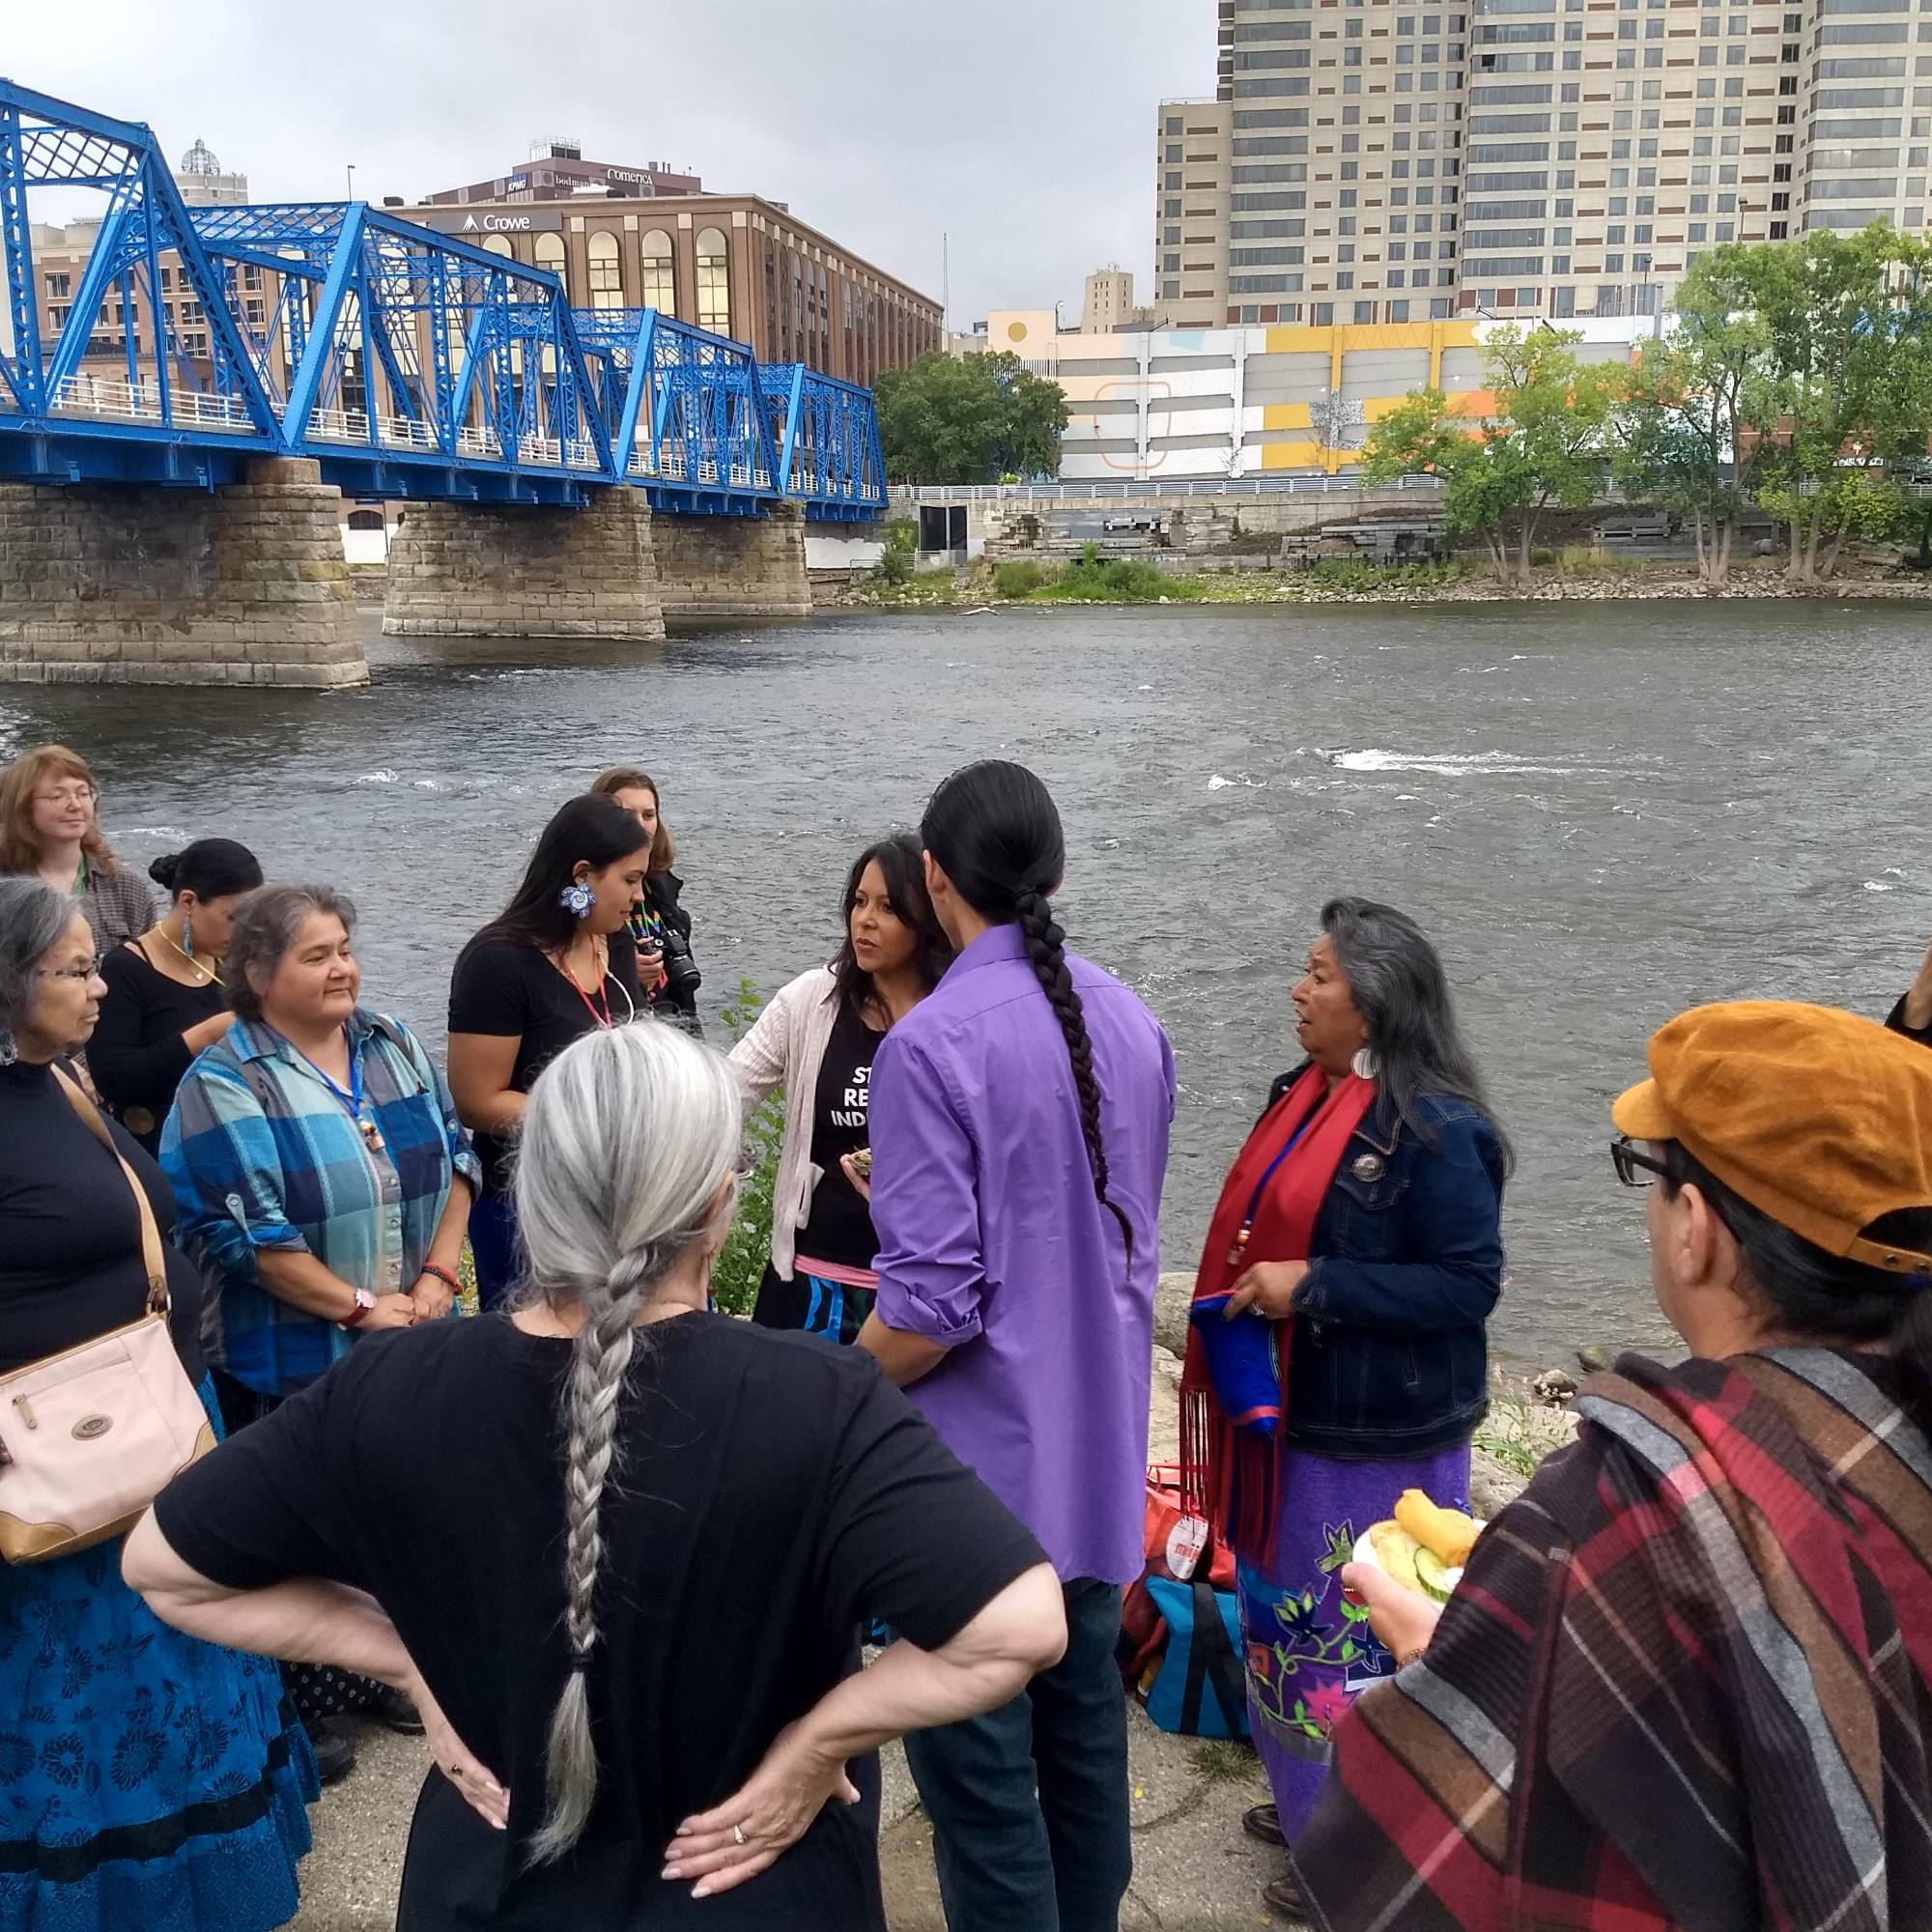 gathering of Native individuals at shore of Grand River in Grand Rapids, MI